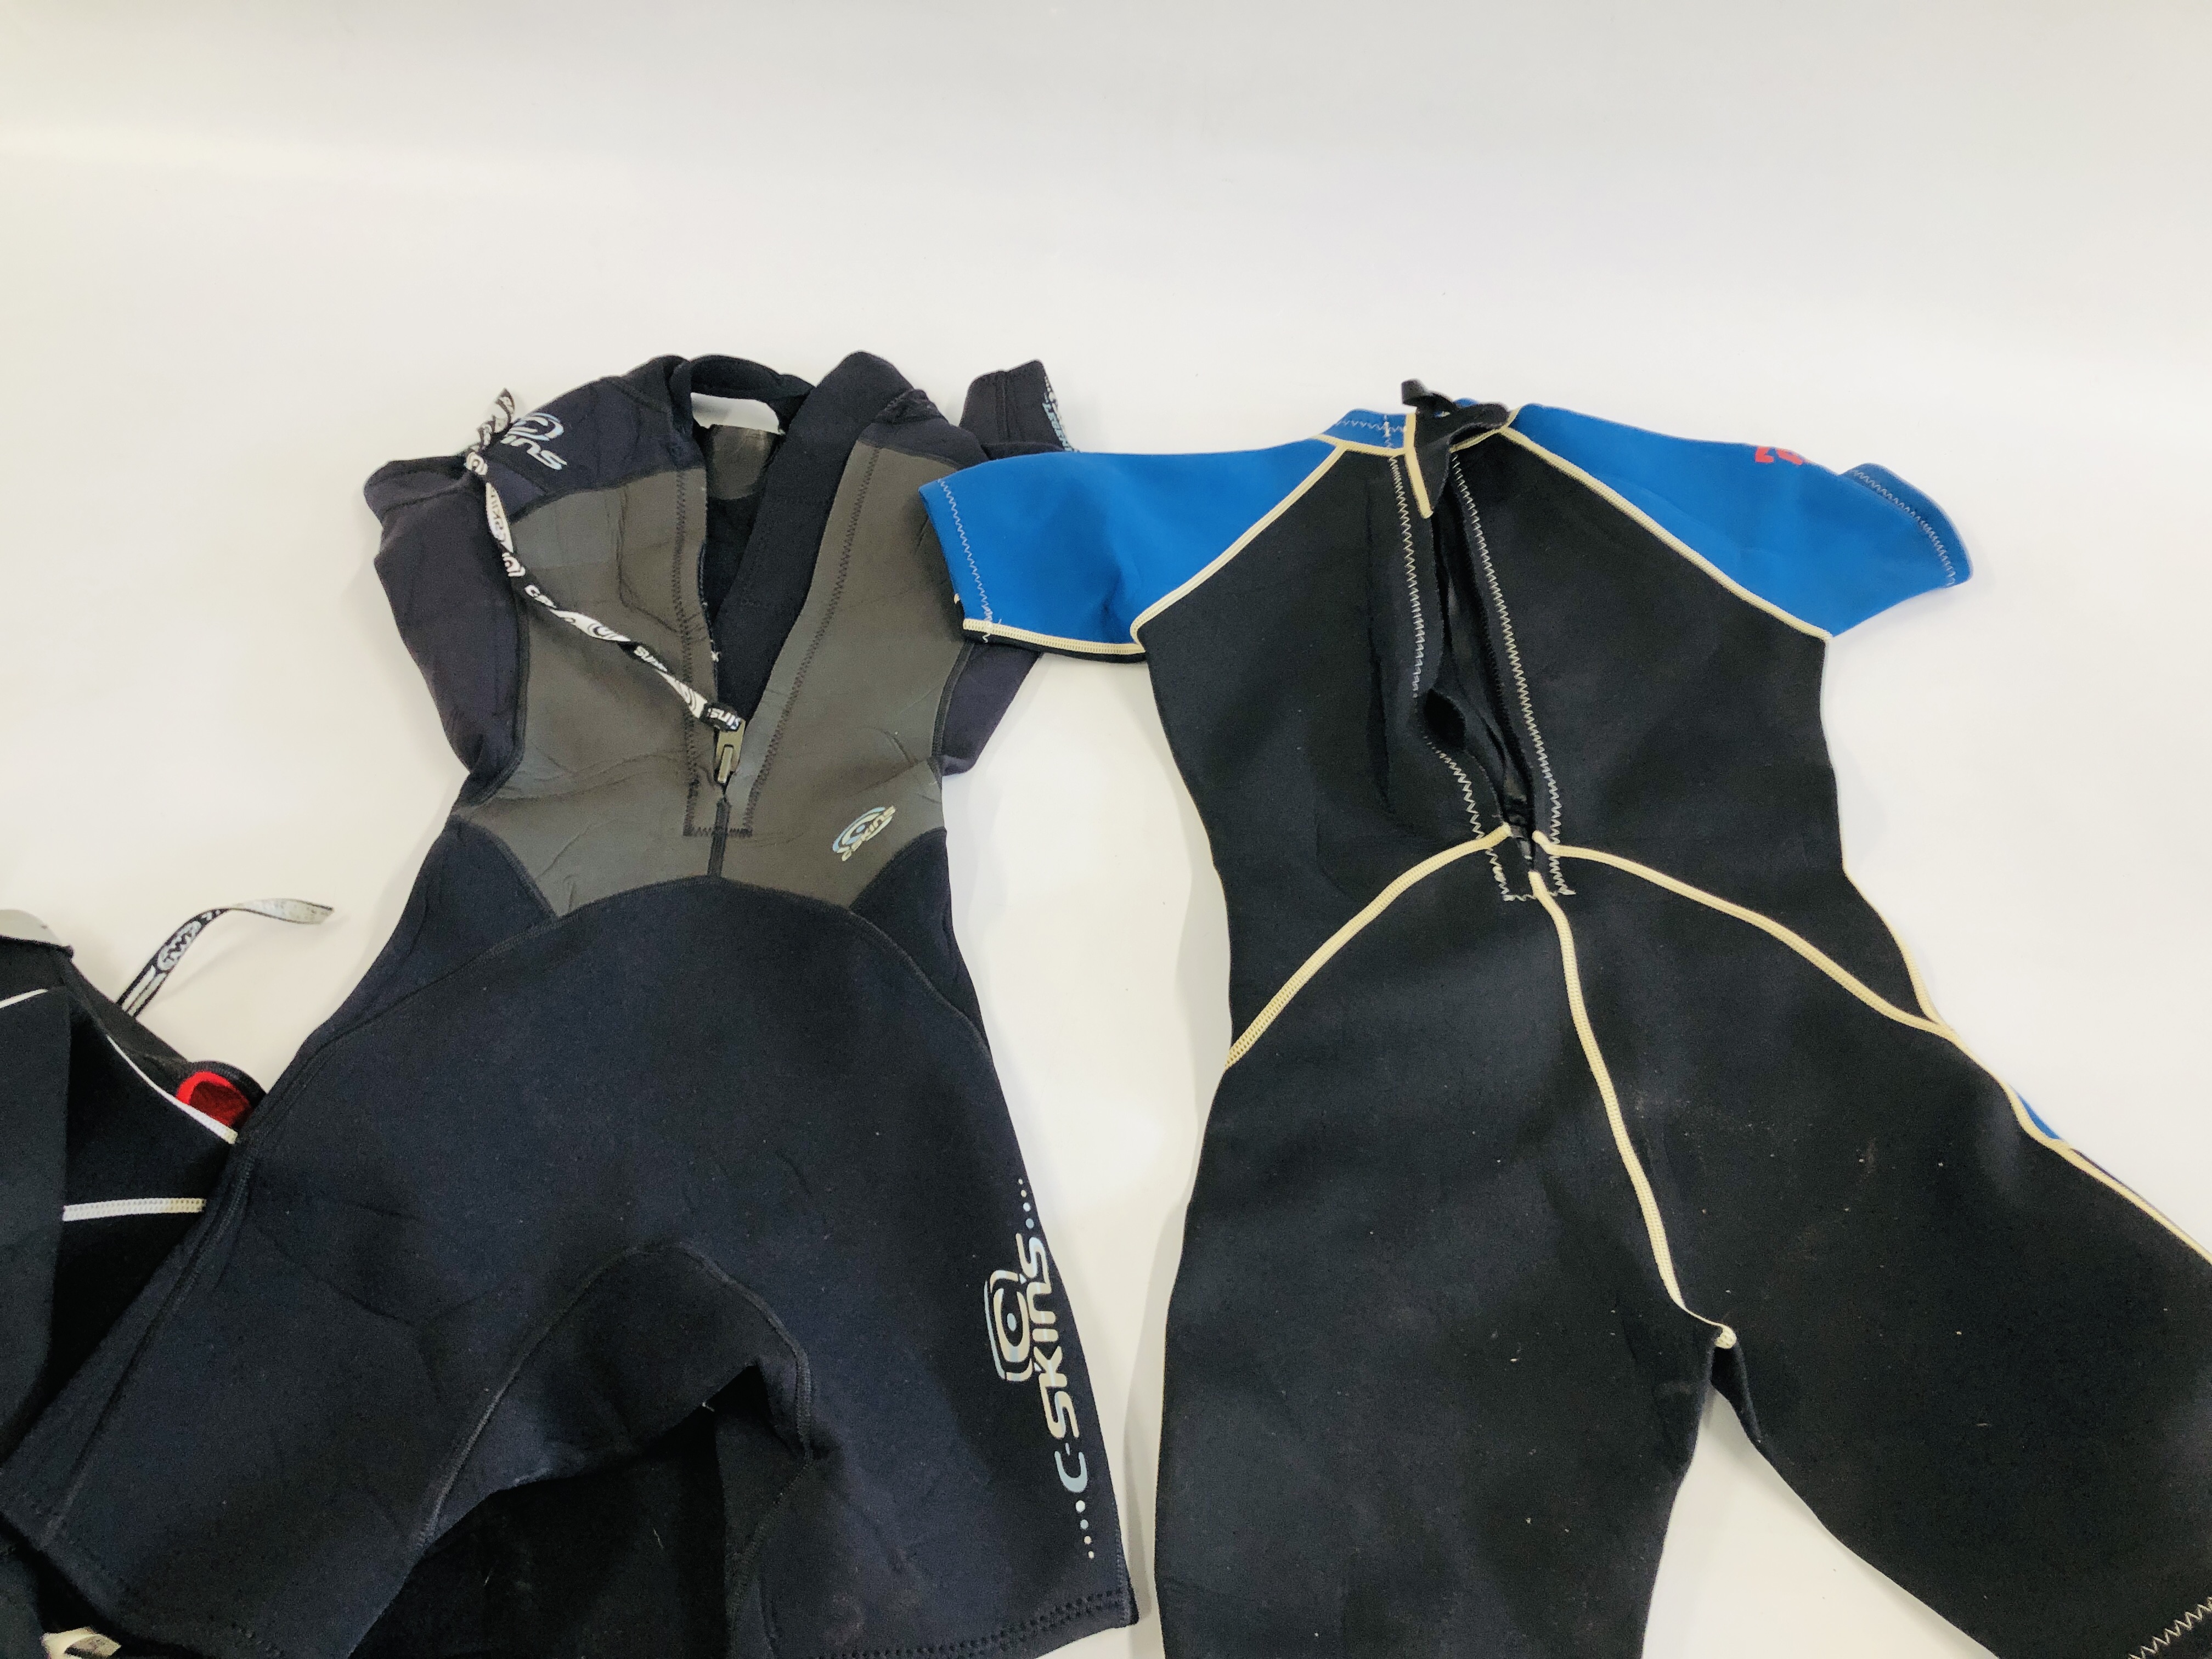 A GROUP OF 7 KIDS WET SUITS INCLUDING SIZES 11, 12 AND 8 + VARIOUS WATER SHOES. - Image 11 of 12